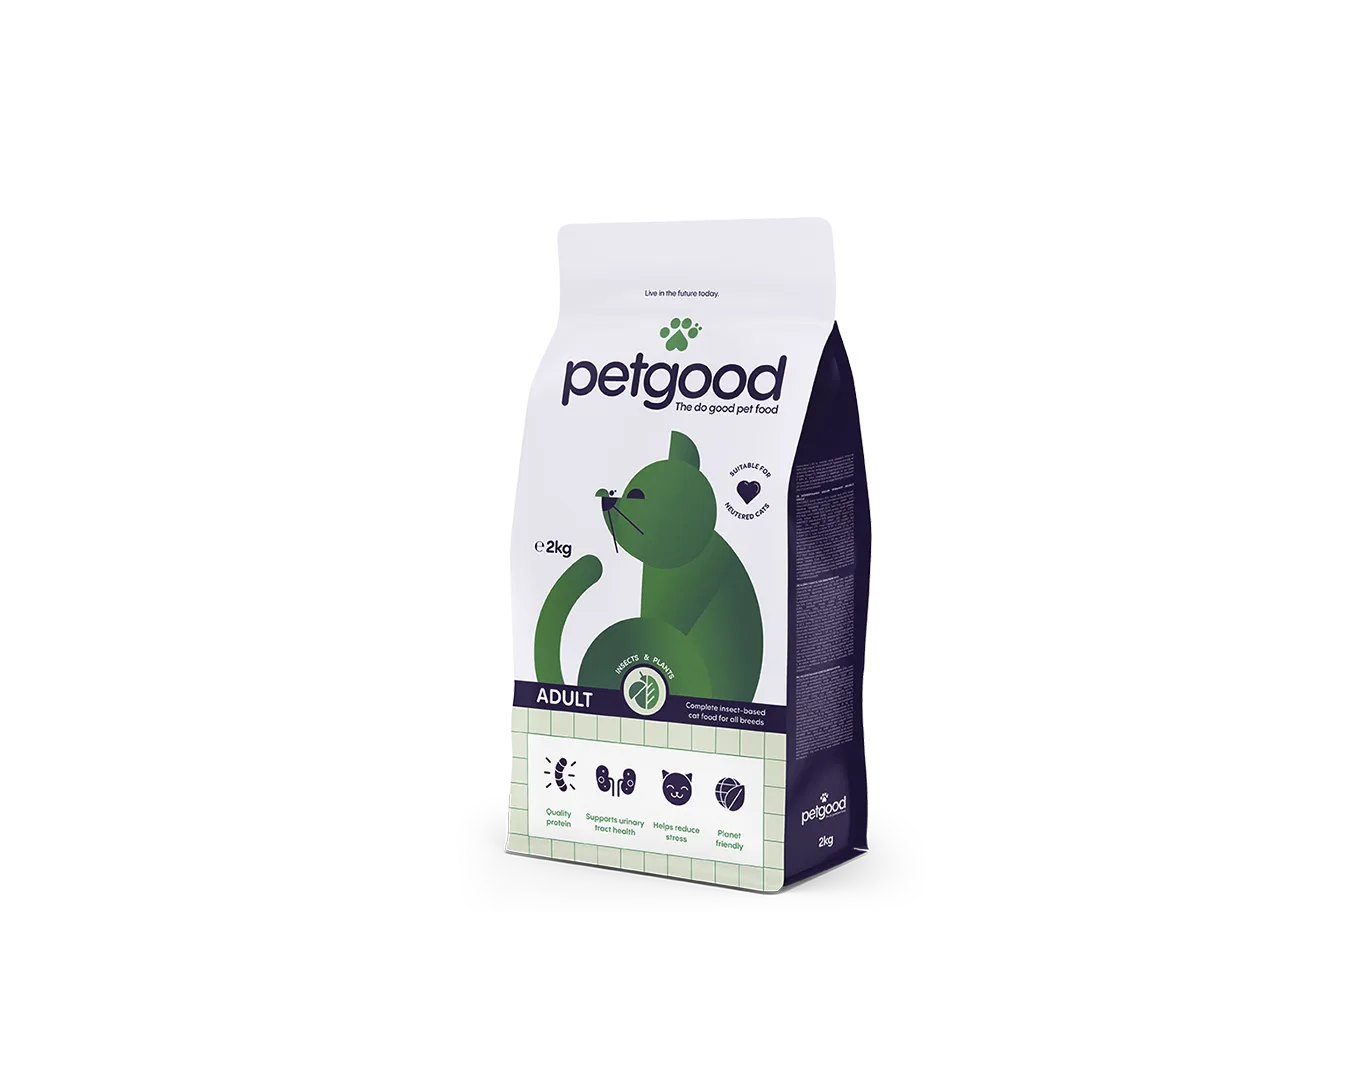 https://a.storyblok.com/f/236174/1350x1080/a32e2ab3ff/insect-based-dry-cat-food-2kg.webp